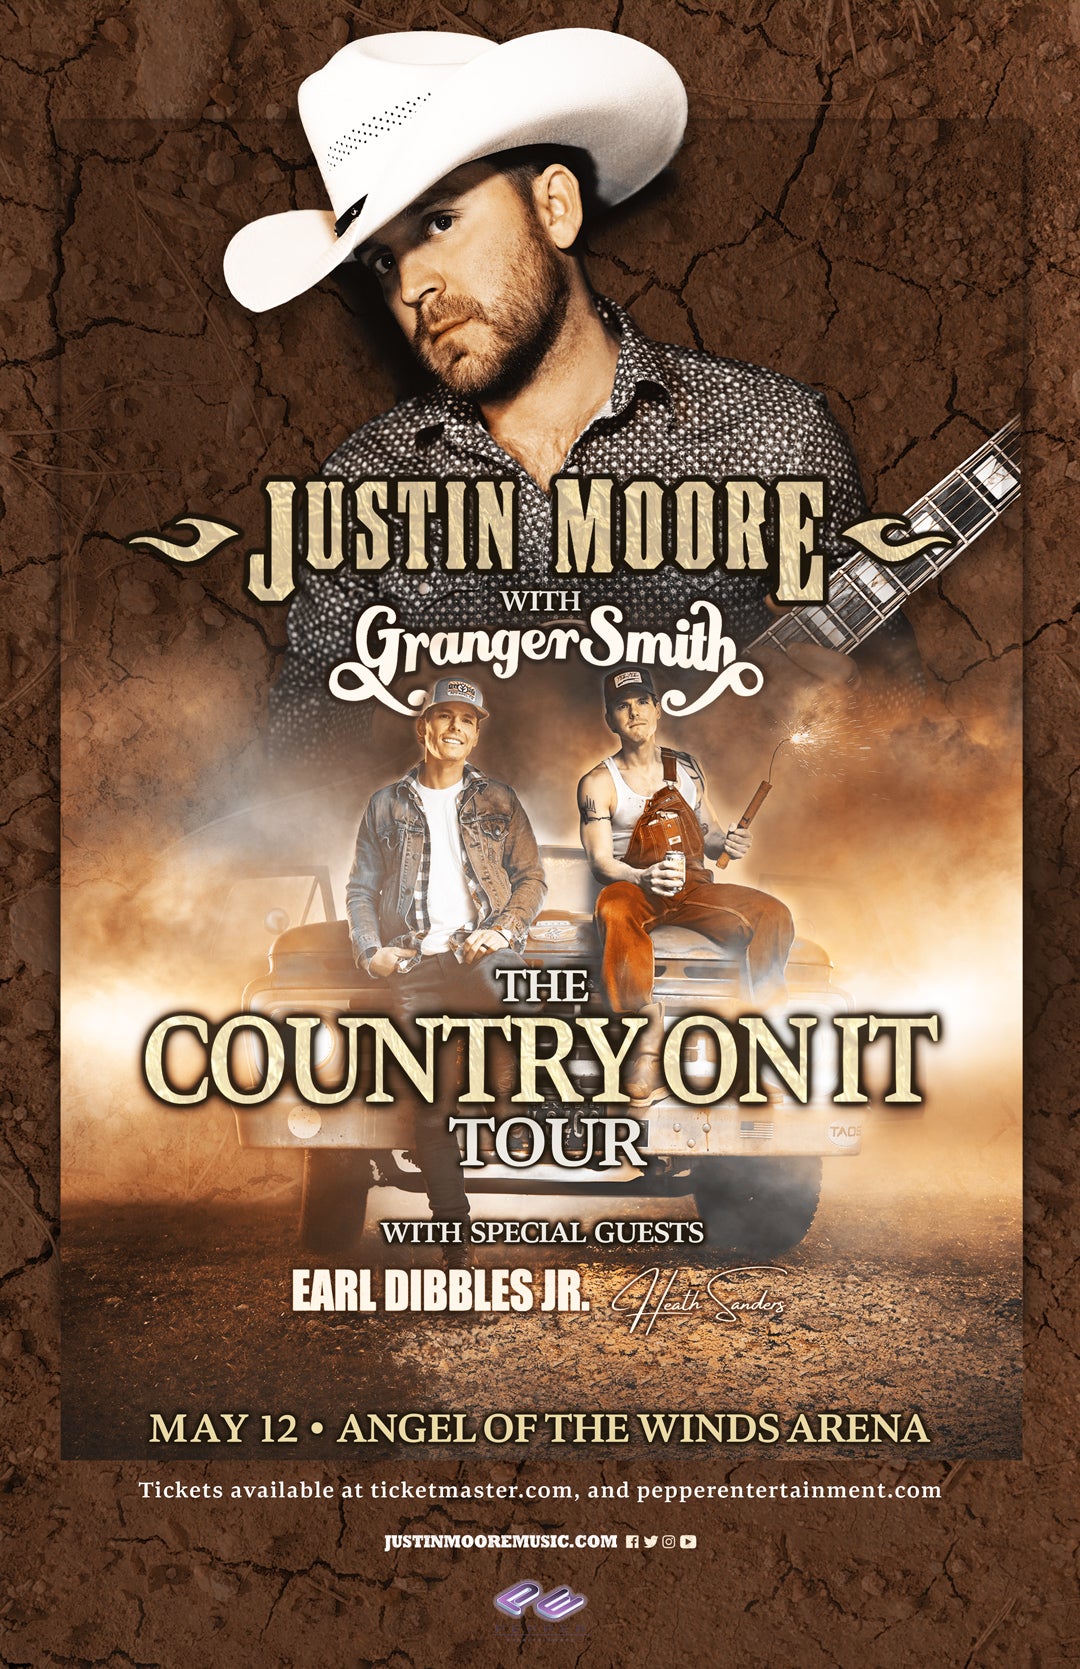 More Info for JUSTIN MOORE - THE COUNTRY ON IT TOUR – with special guests Granger Smith ft. Earl Dibbles Jr. and Heath Sanders.